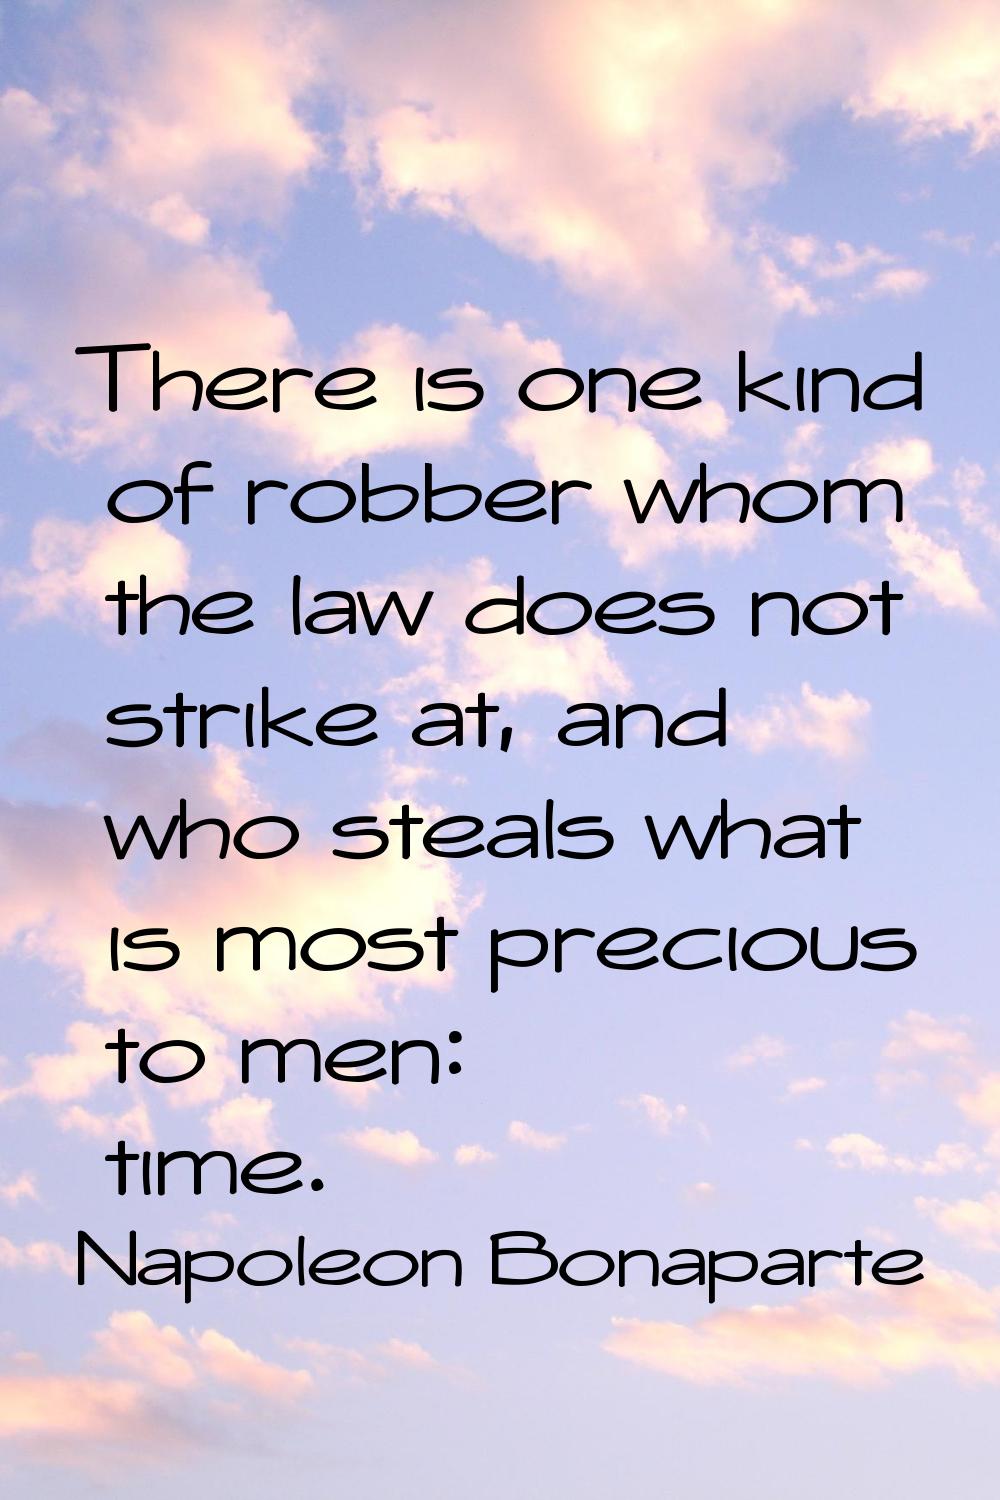 There is one kind of robber whom the law does not strike at, and who steals what is most precious t